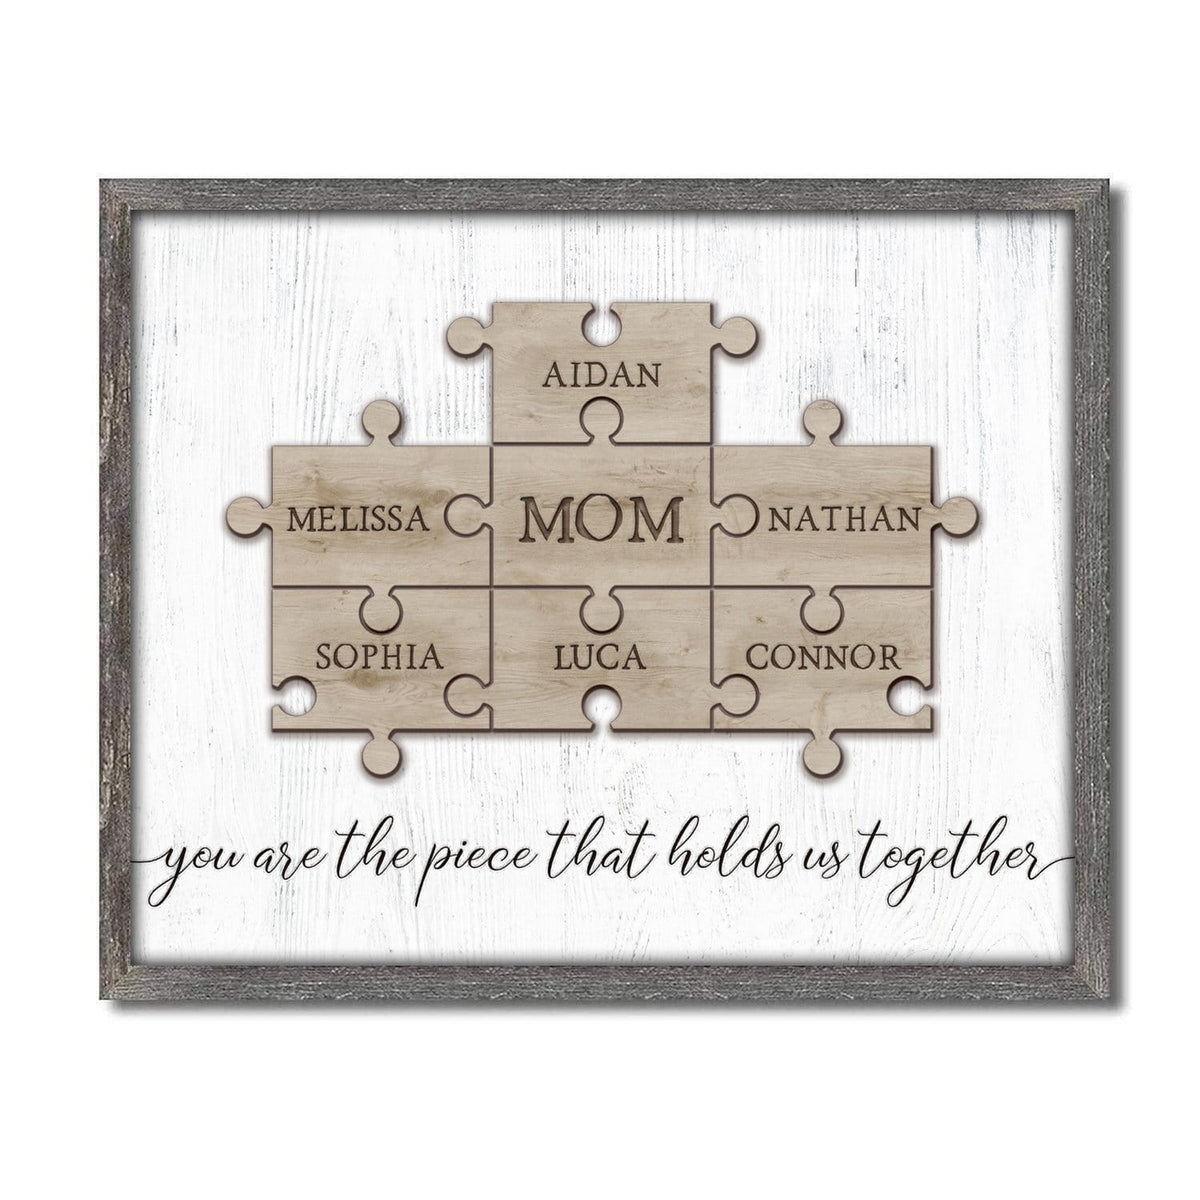 mom is the piece that holds us together personalized art